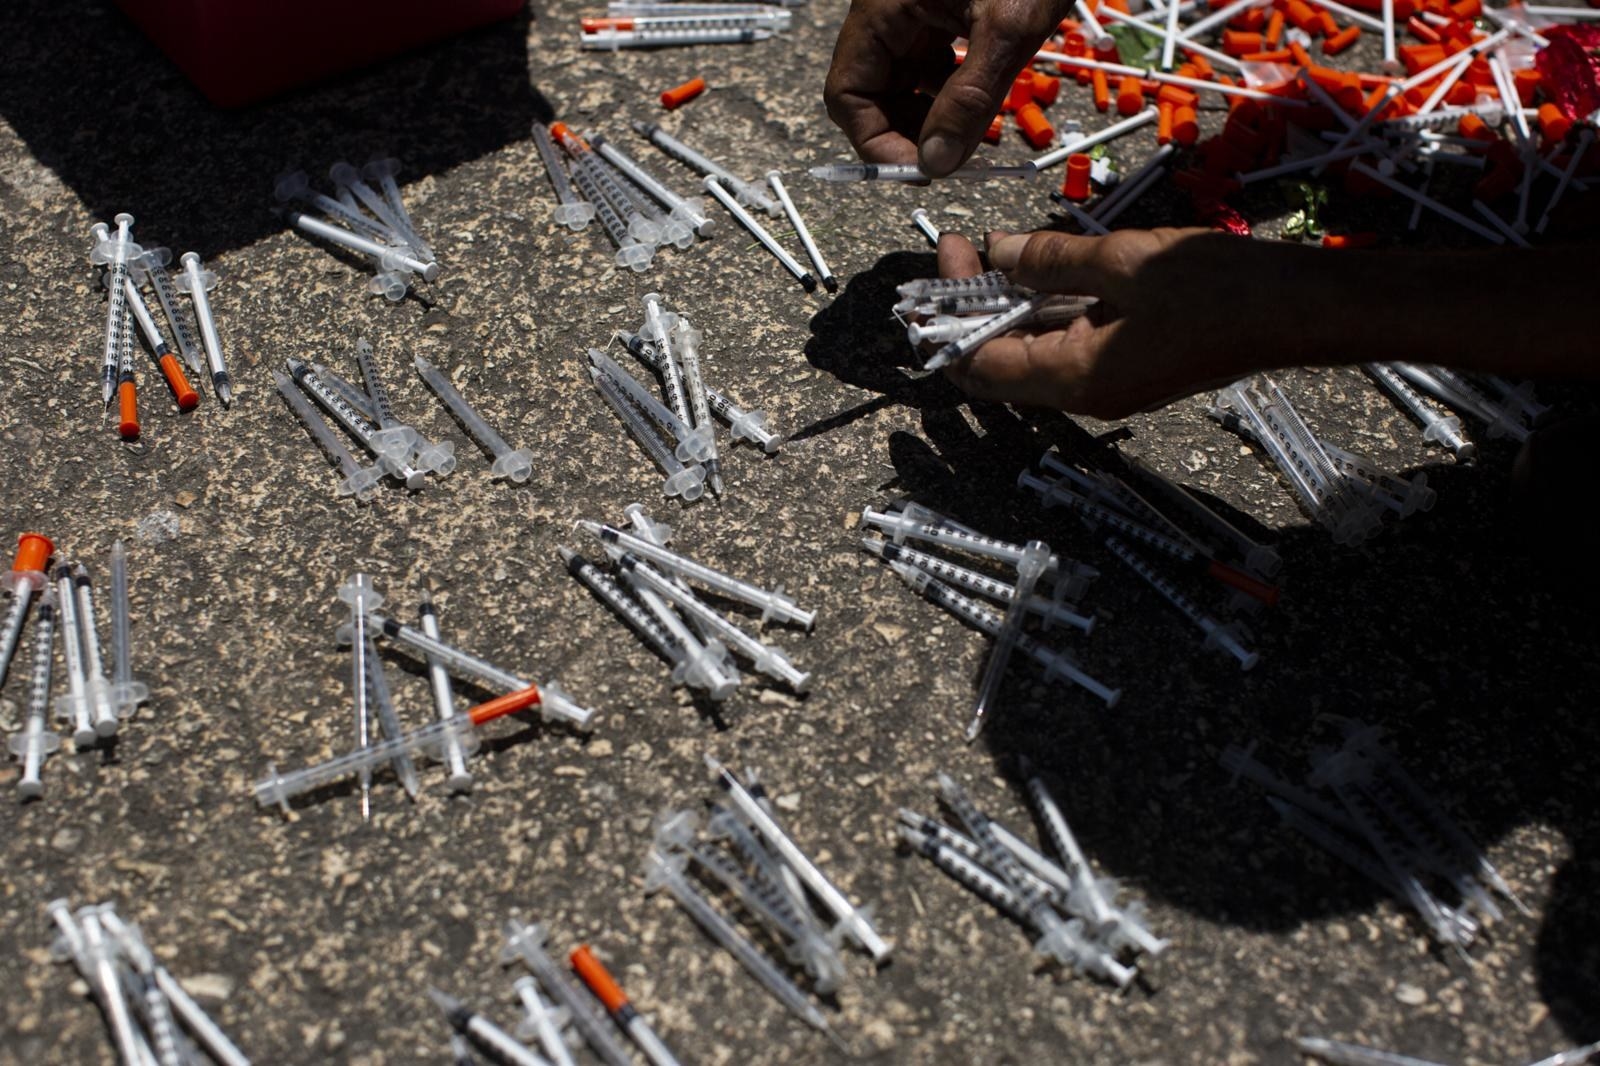 A participant counts his used needles before putting them in a safe container in exchange for new ones